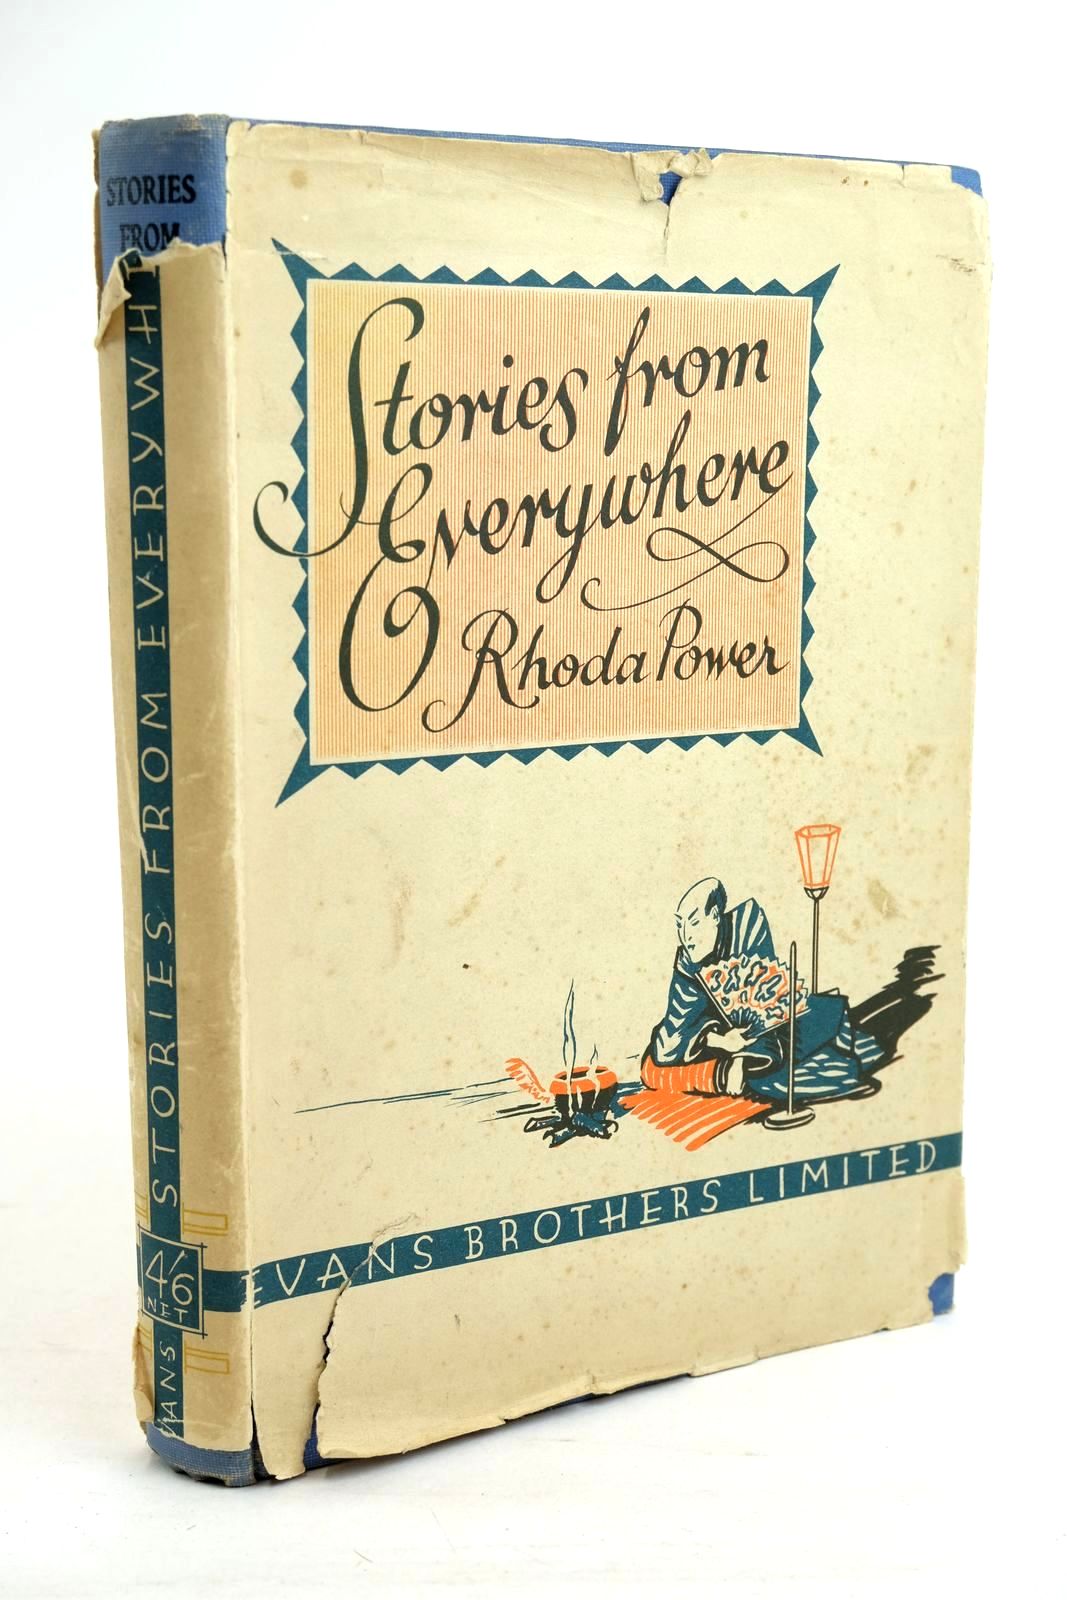 Photo of STORIES FROM EVERYWHERE written by Power, Rhoda illustrated by Brisley, Nina K. published by Evans Brothers Limited (STOCK CODE: 1320440)  for sale by Stella & Rose's Books